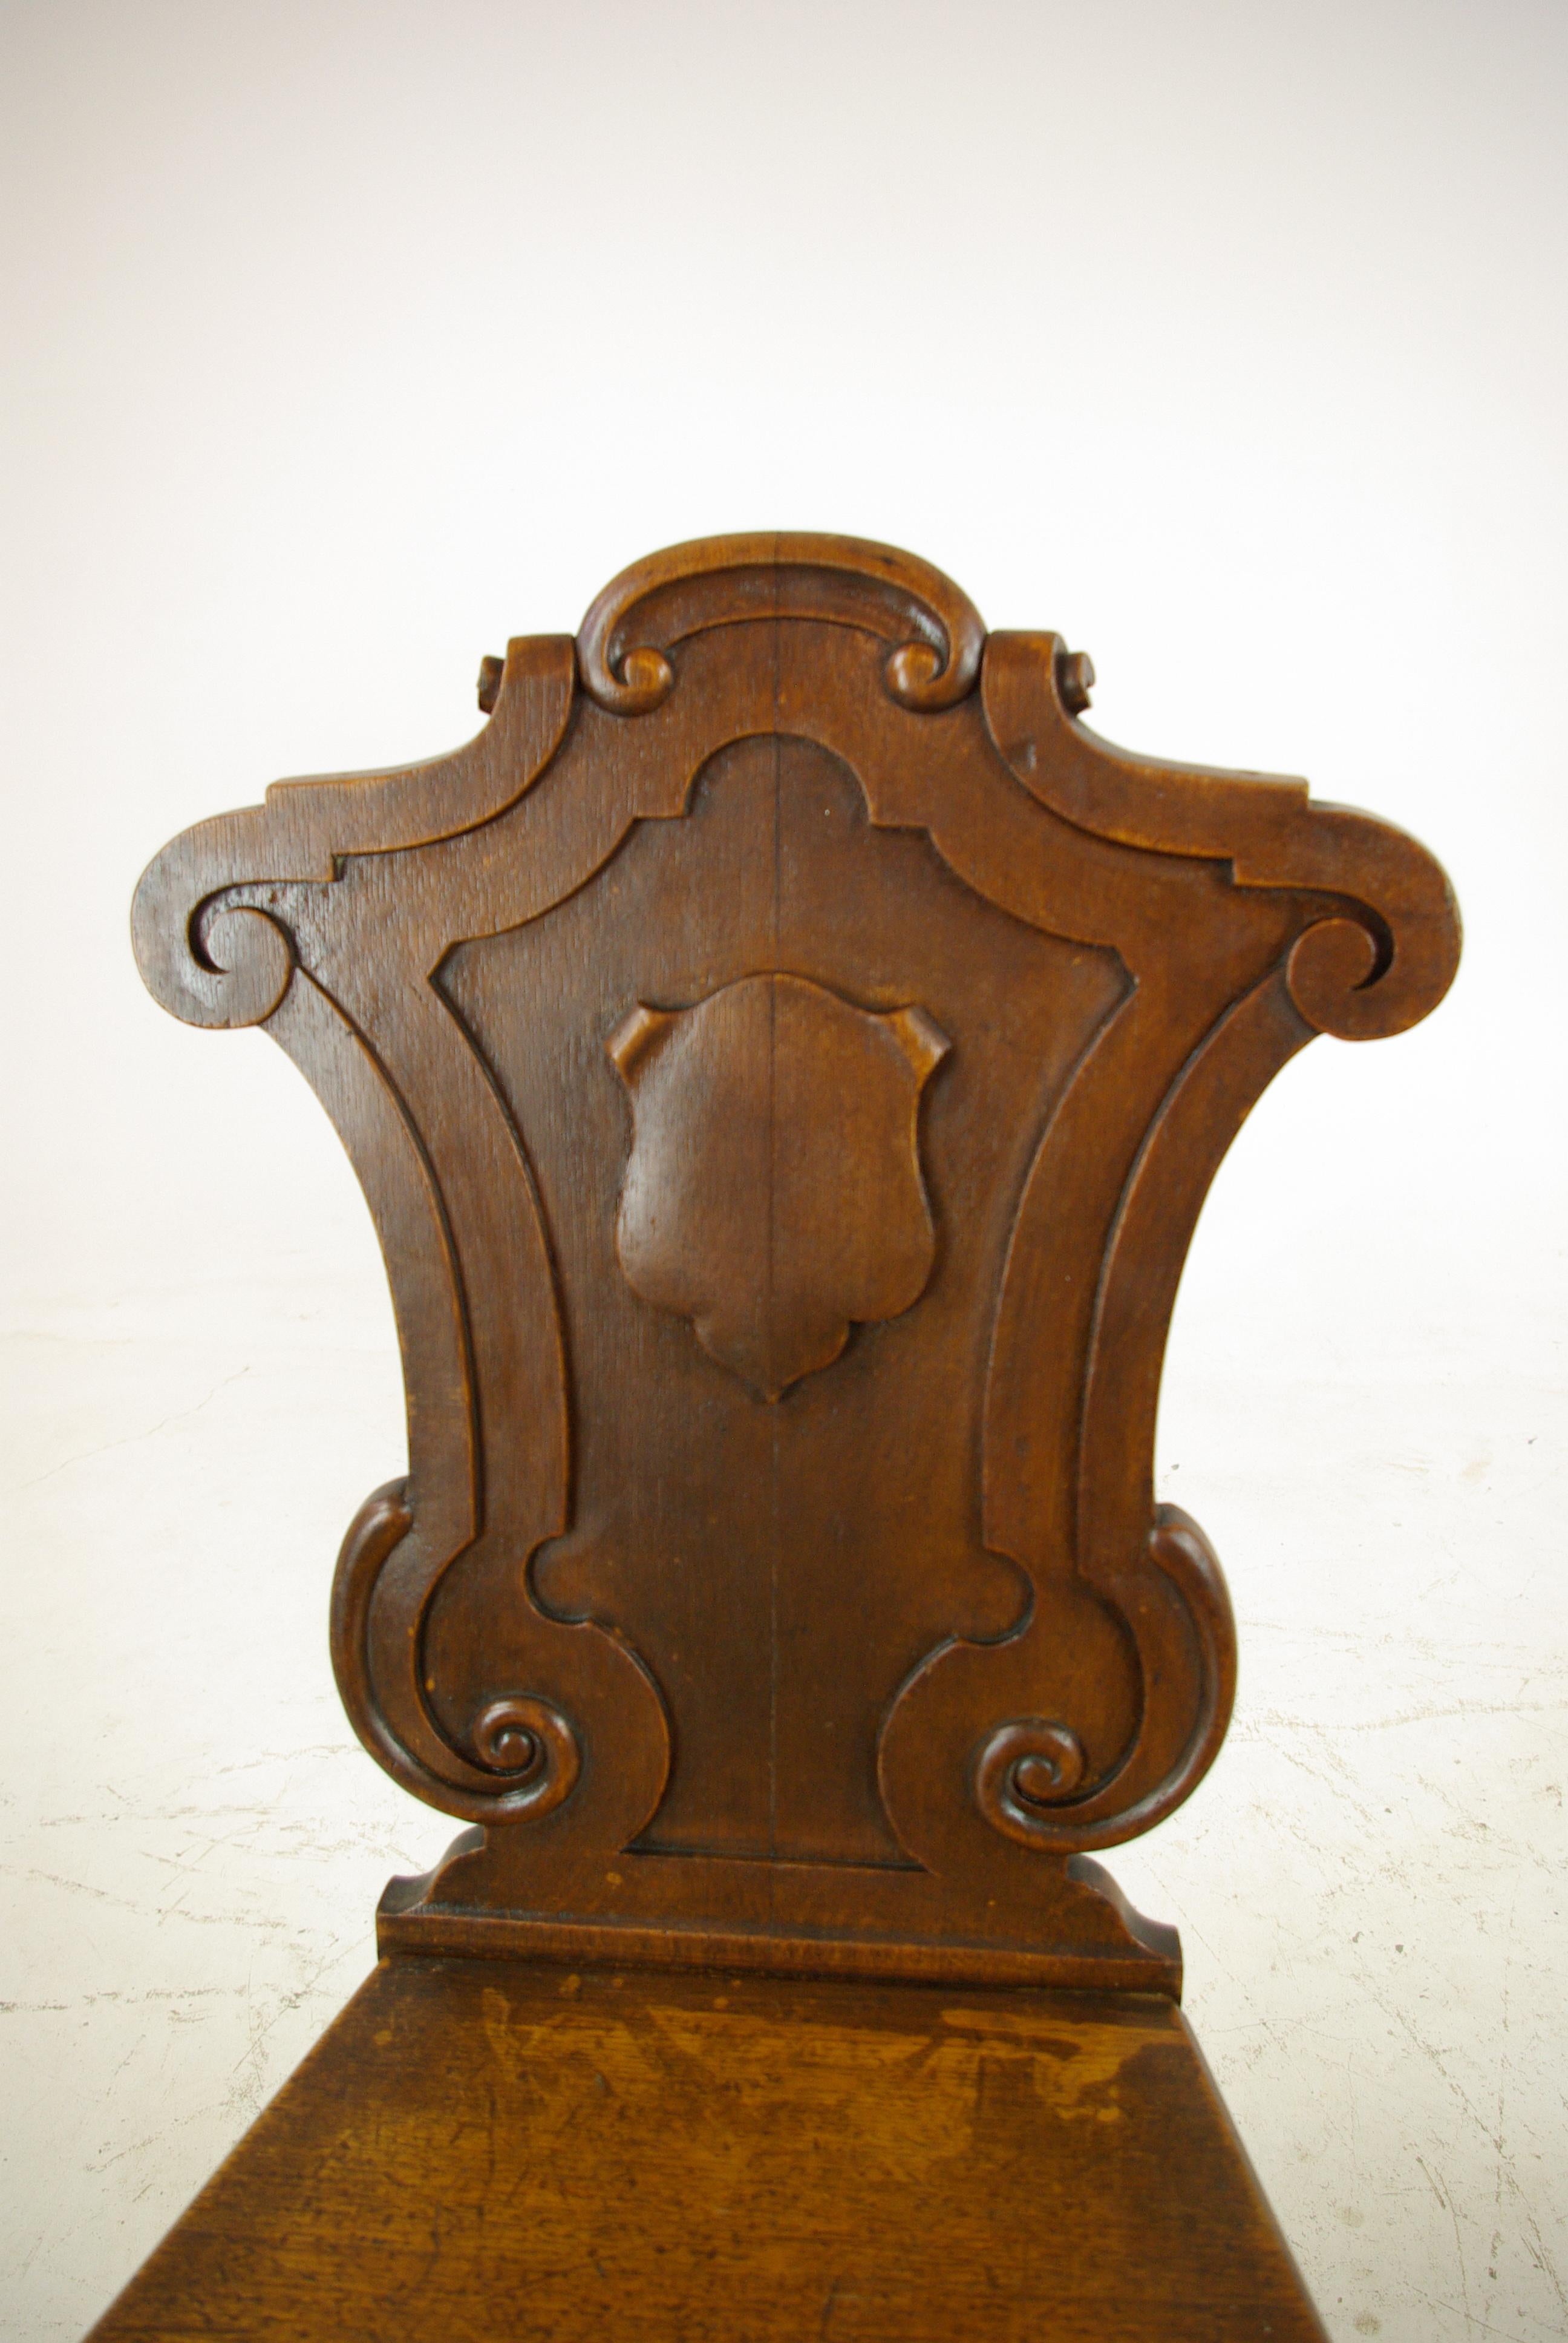 Antique oak hall chairs, Regency hall chairs, Scotland, 1820, Antique Furniture, B1089.

Scotland, 1820.
Carved shaped backs
Central shield to back of chair
Solid shaped seats of tapering form
Raised on turned legs on front
Outswept sabre